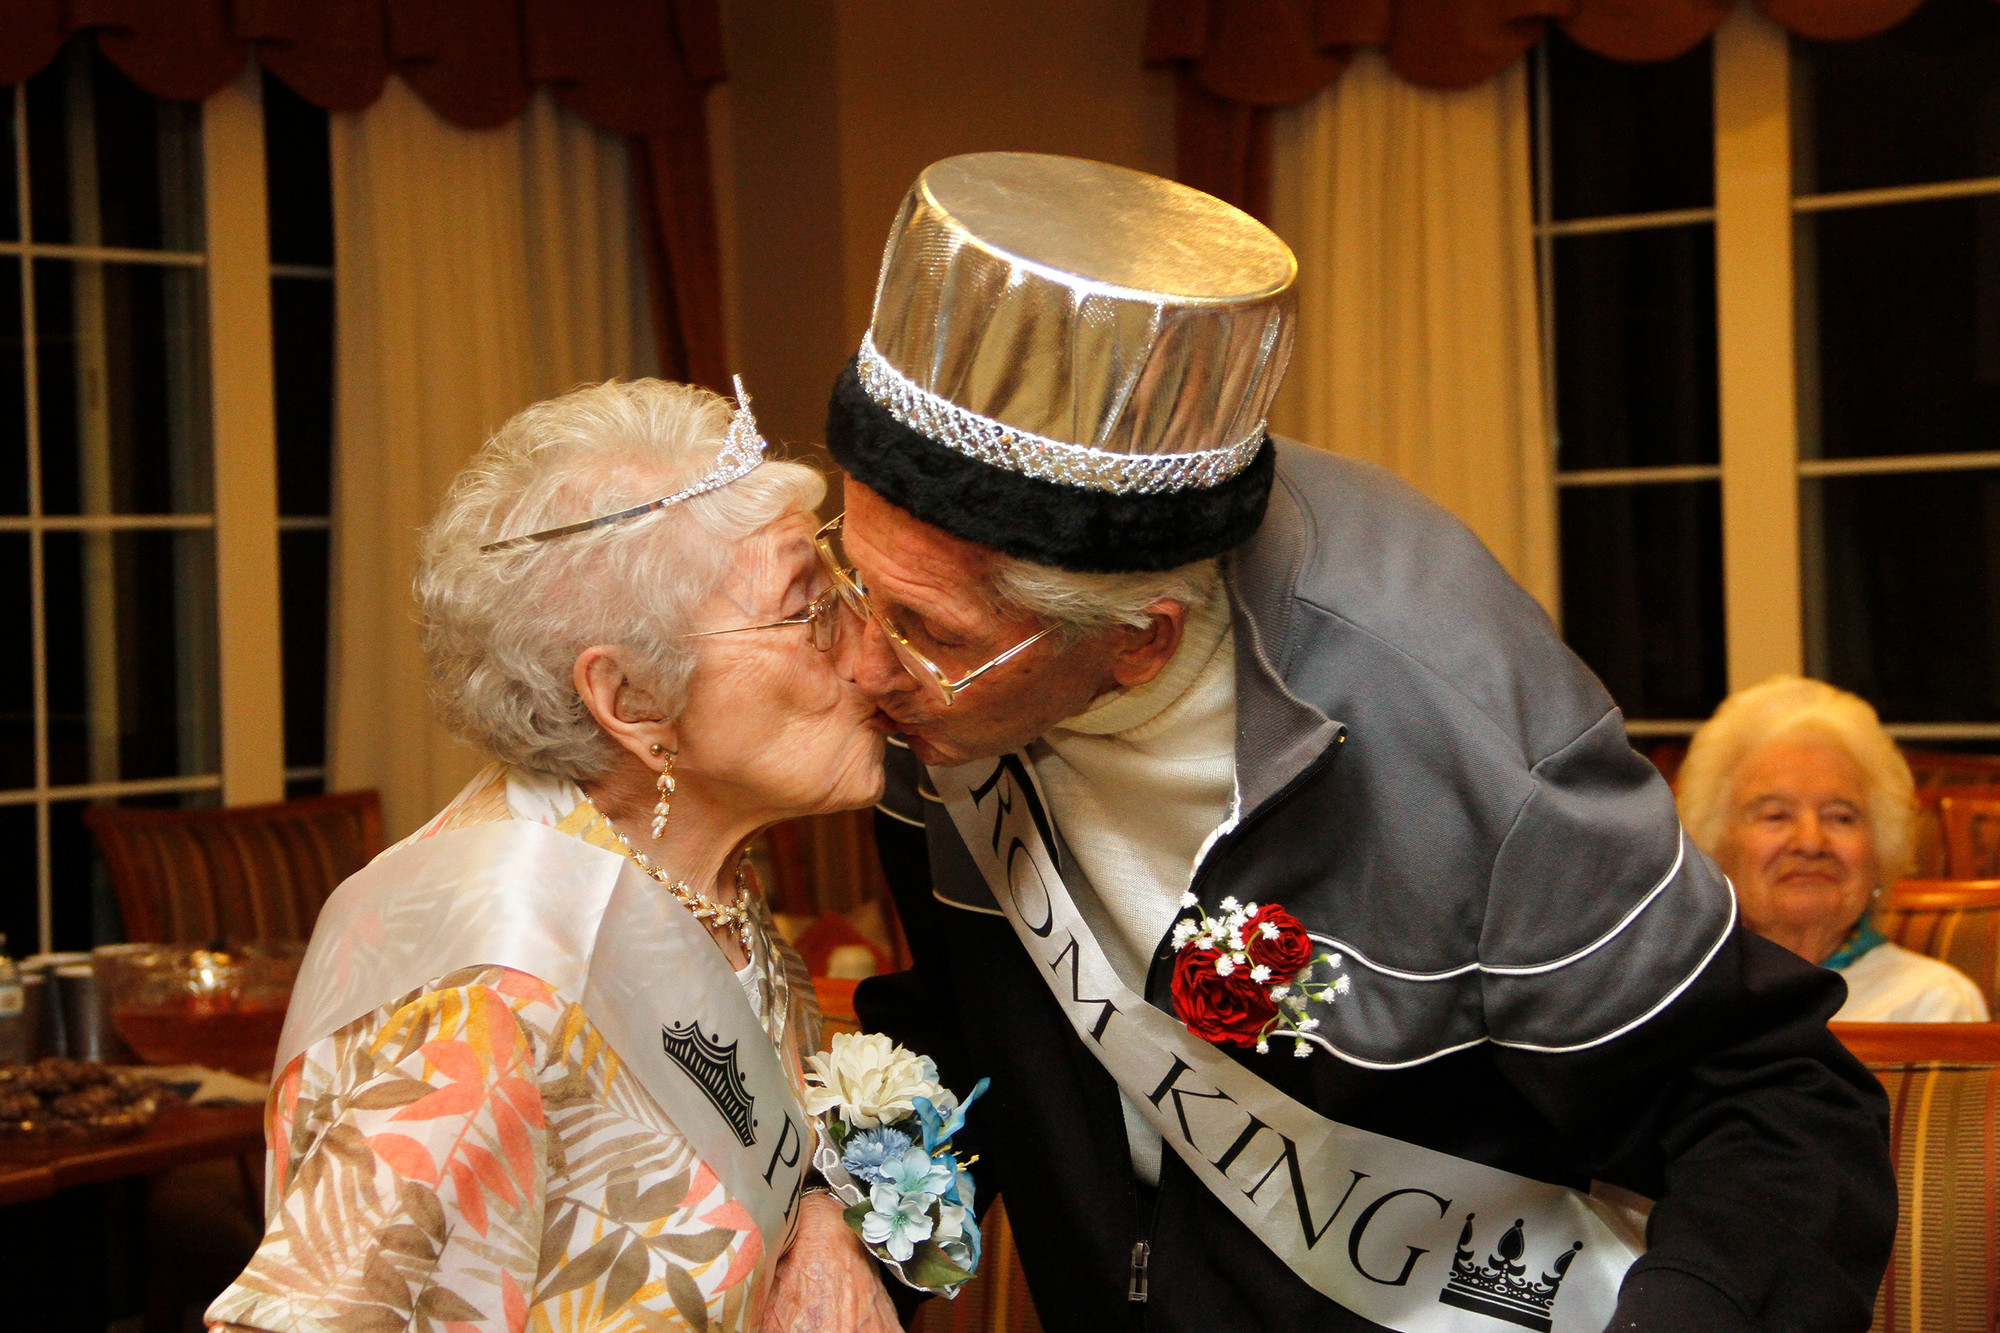 Paul and Ruth Soffrin were named king and queen of the senior prom at the Atria assisted living facility in Plainview on Aug. 27.